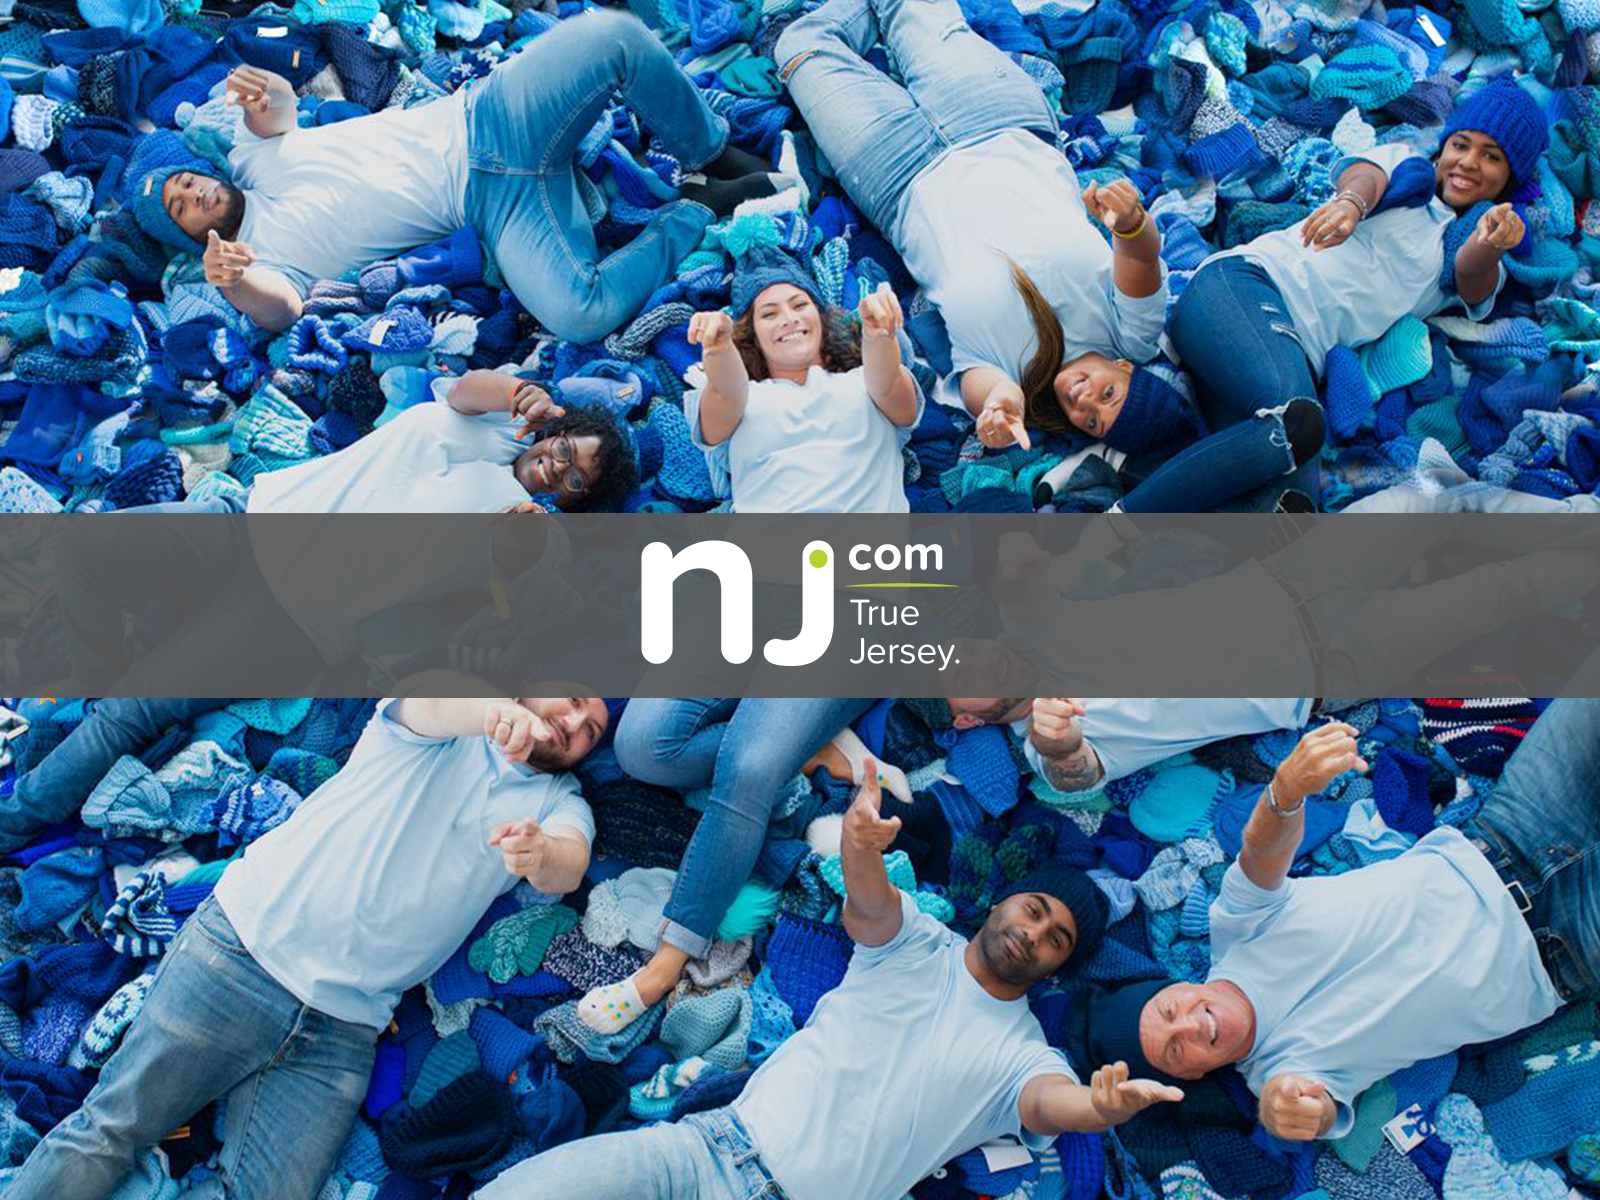 NJ.com logo overlaid on image of Shira and friends laying on pile of blue hats